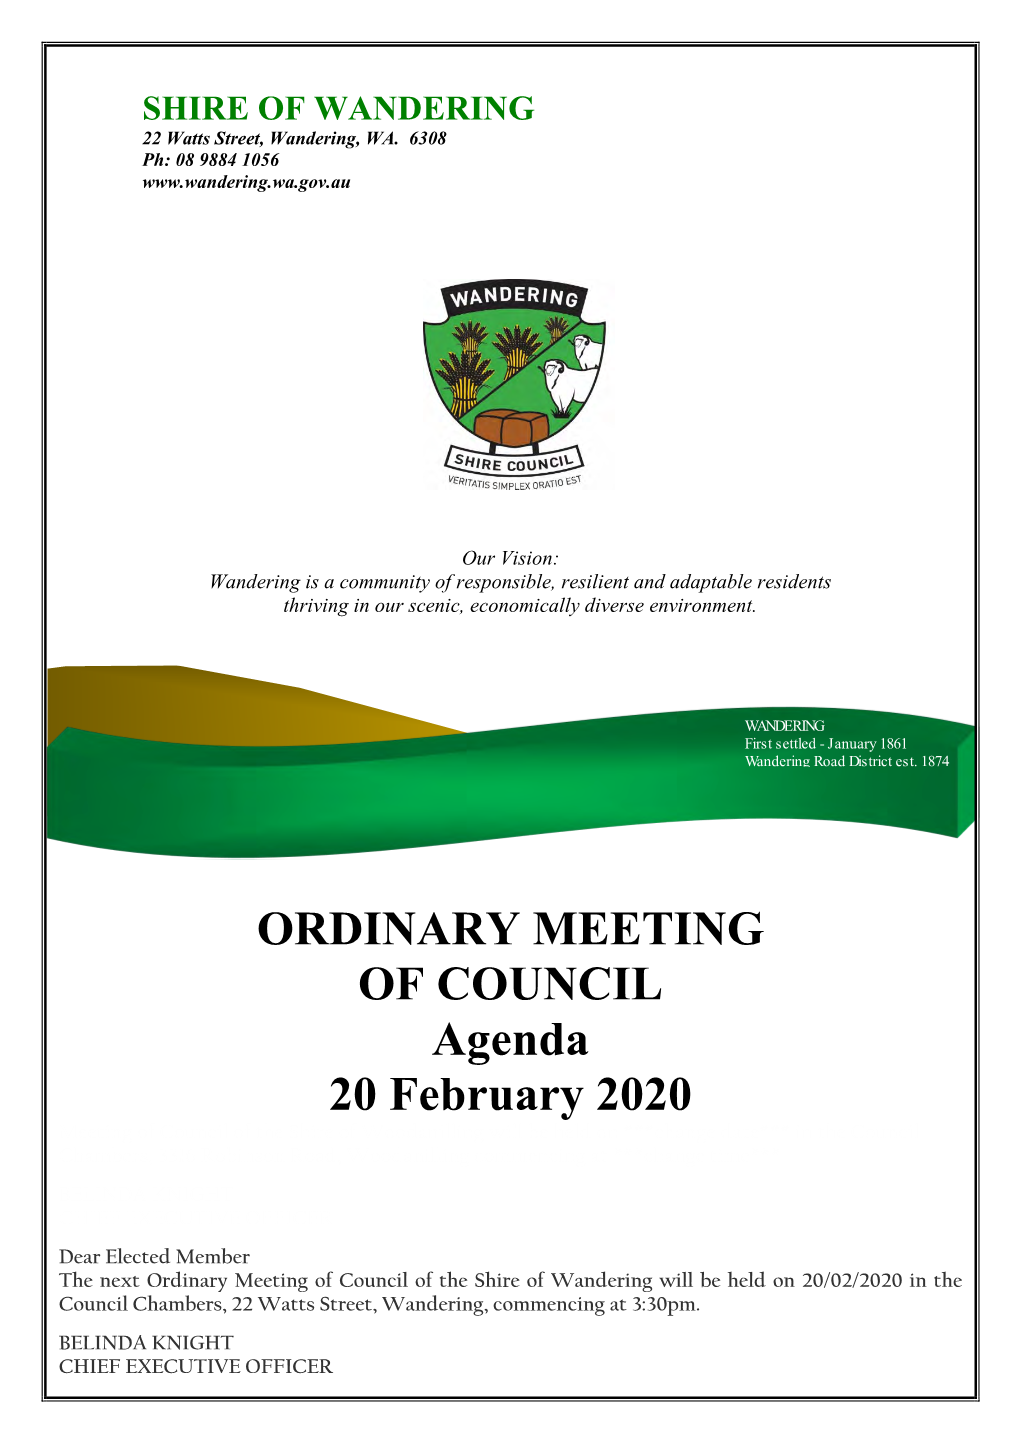 Ordinary Meeting of Council